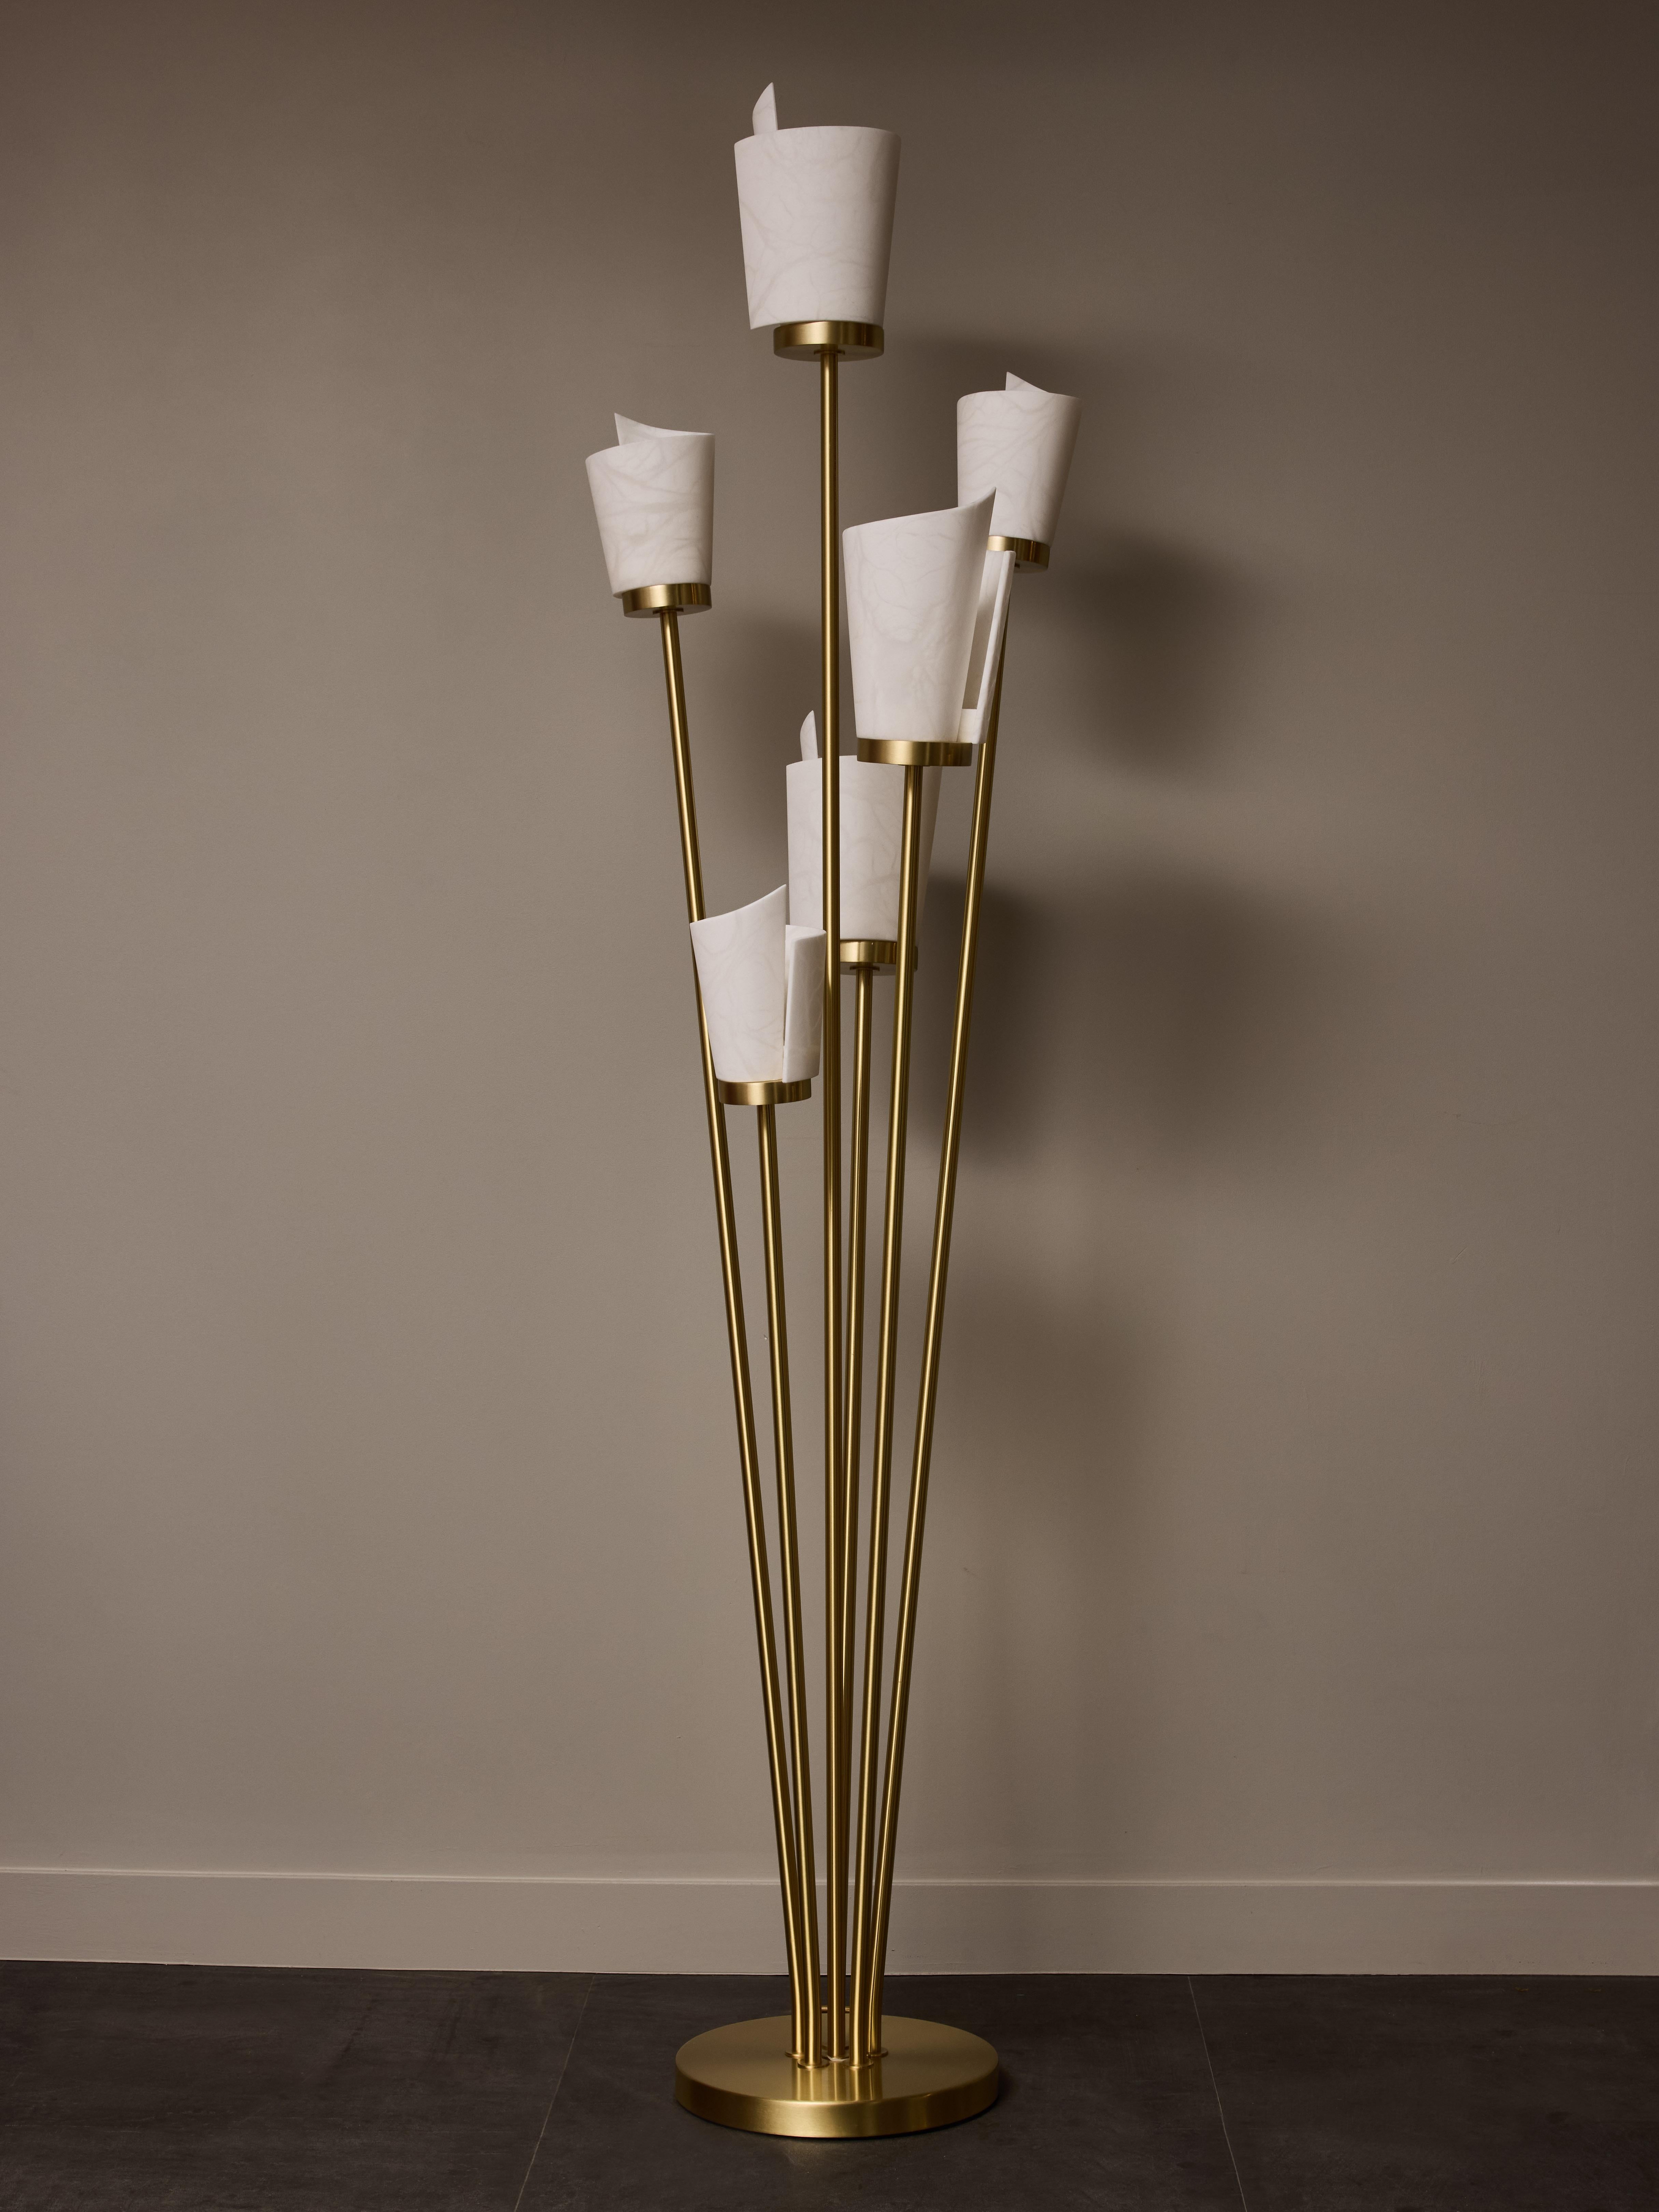 Satinated brass floor lamp made of a round base and six tilted arms of light topped by new spiral shaped alabaster diffuser.
